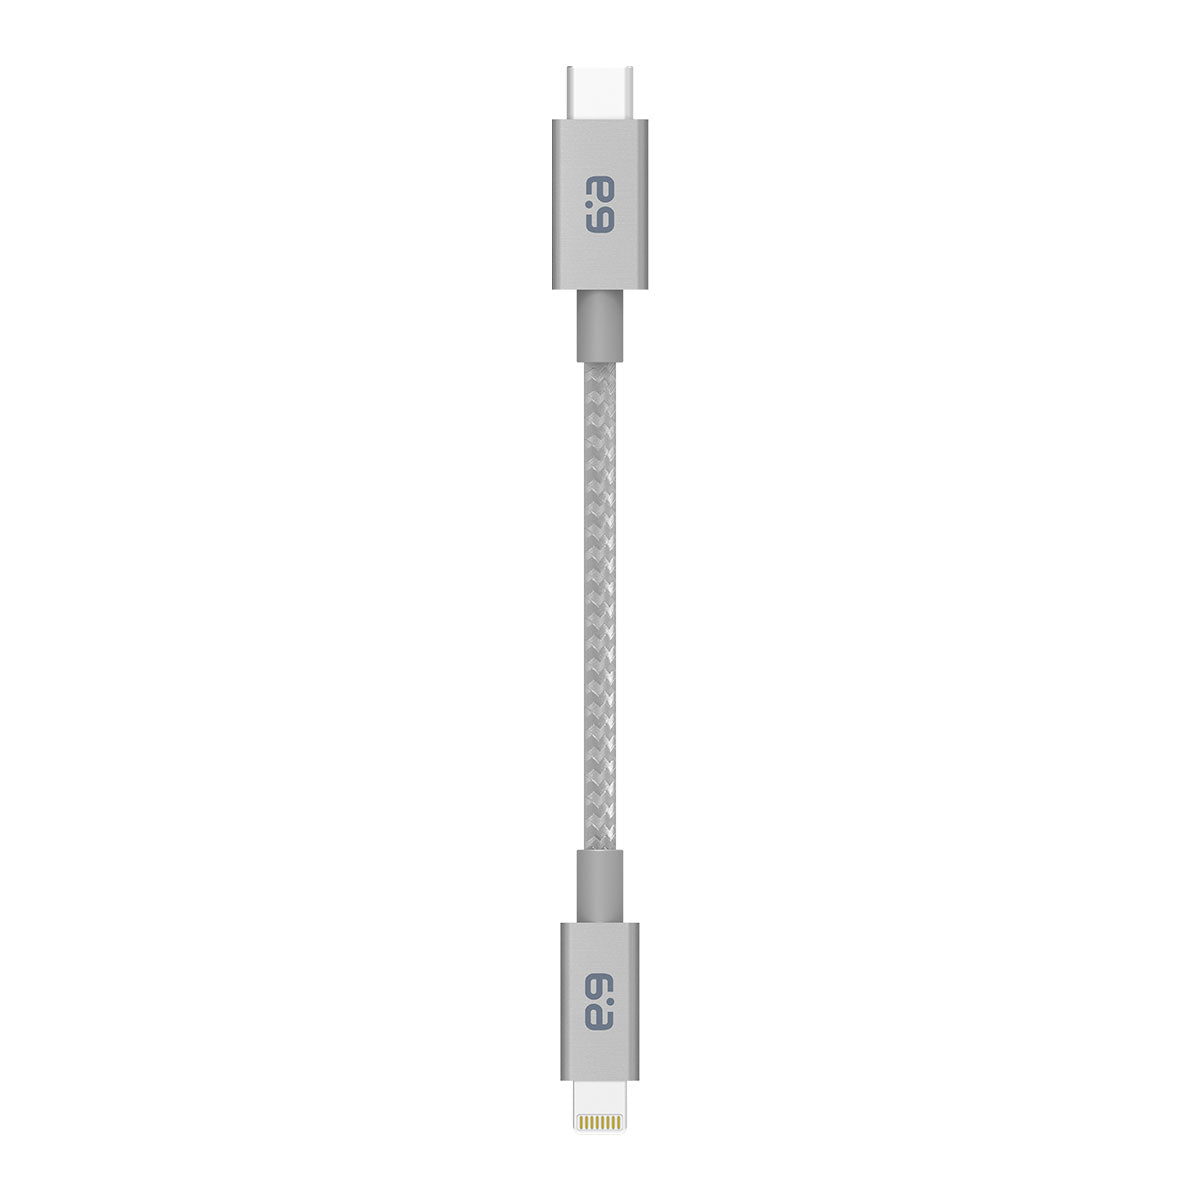 Puregear Rounded Lightning To USB-C Cable 10 Ft - Space Gray